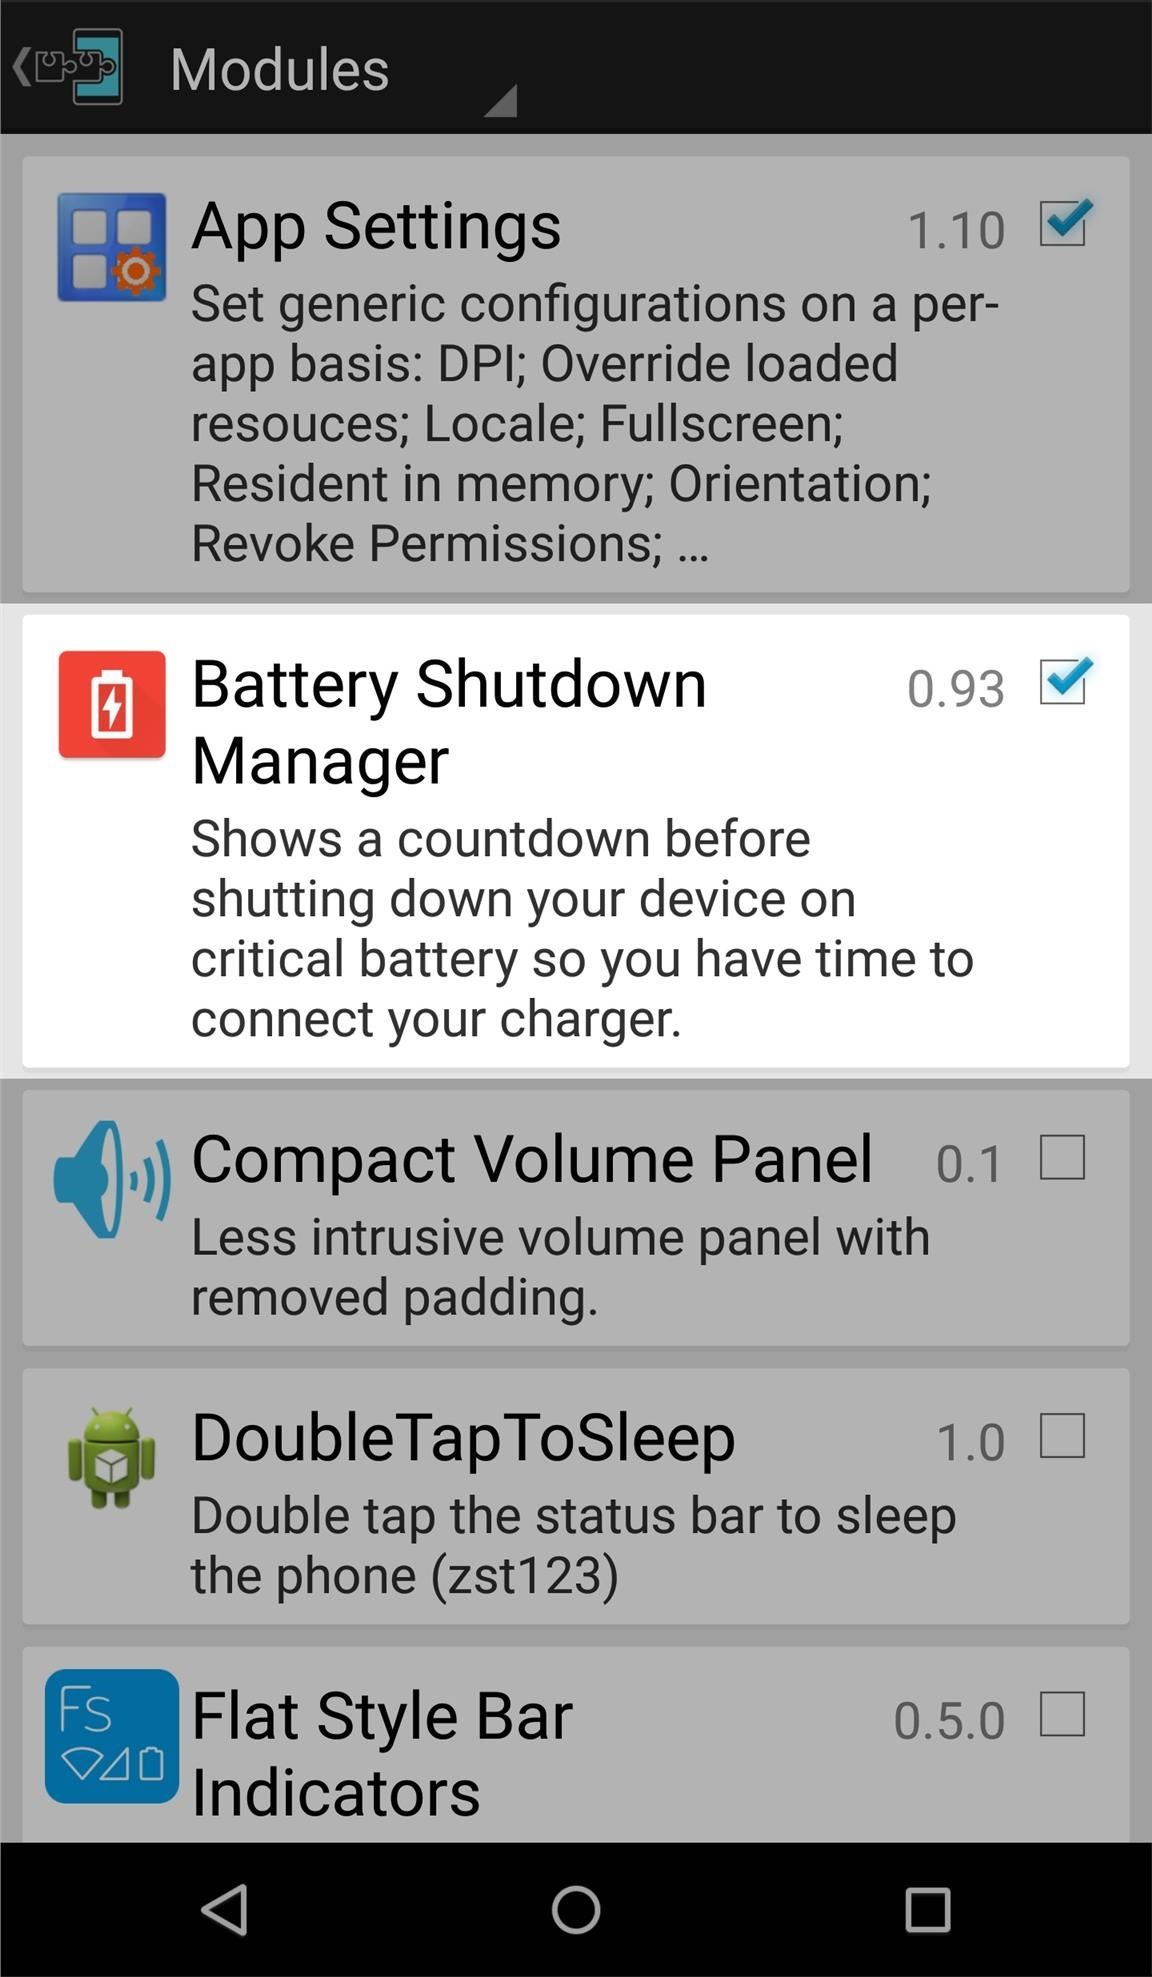 See How Long Your Android Has Before Automatically Shutting Down from a Low Battery